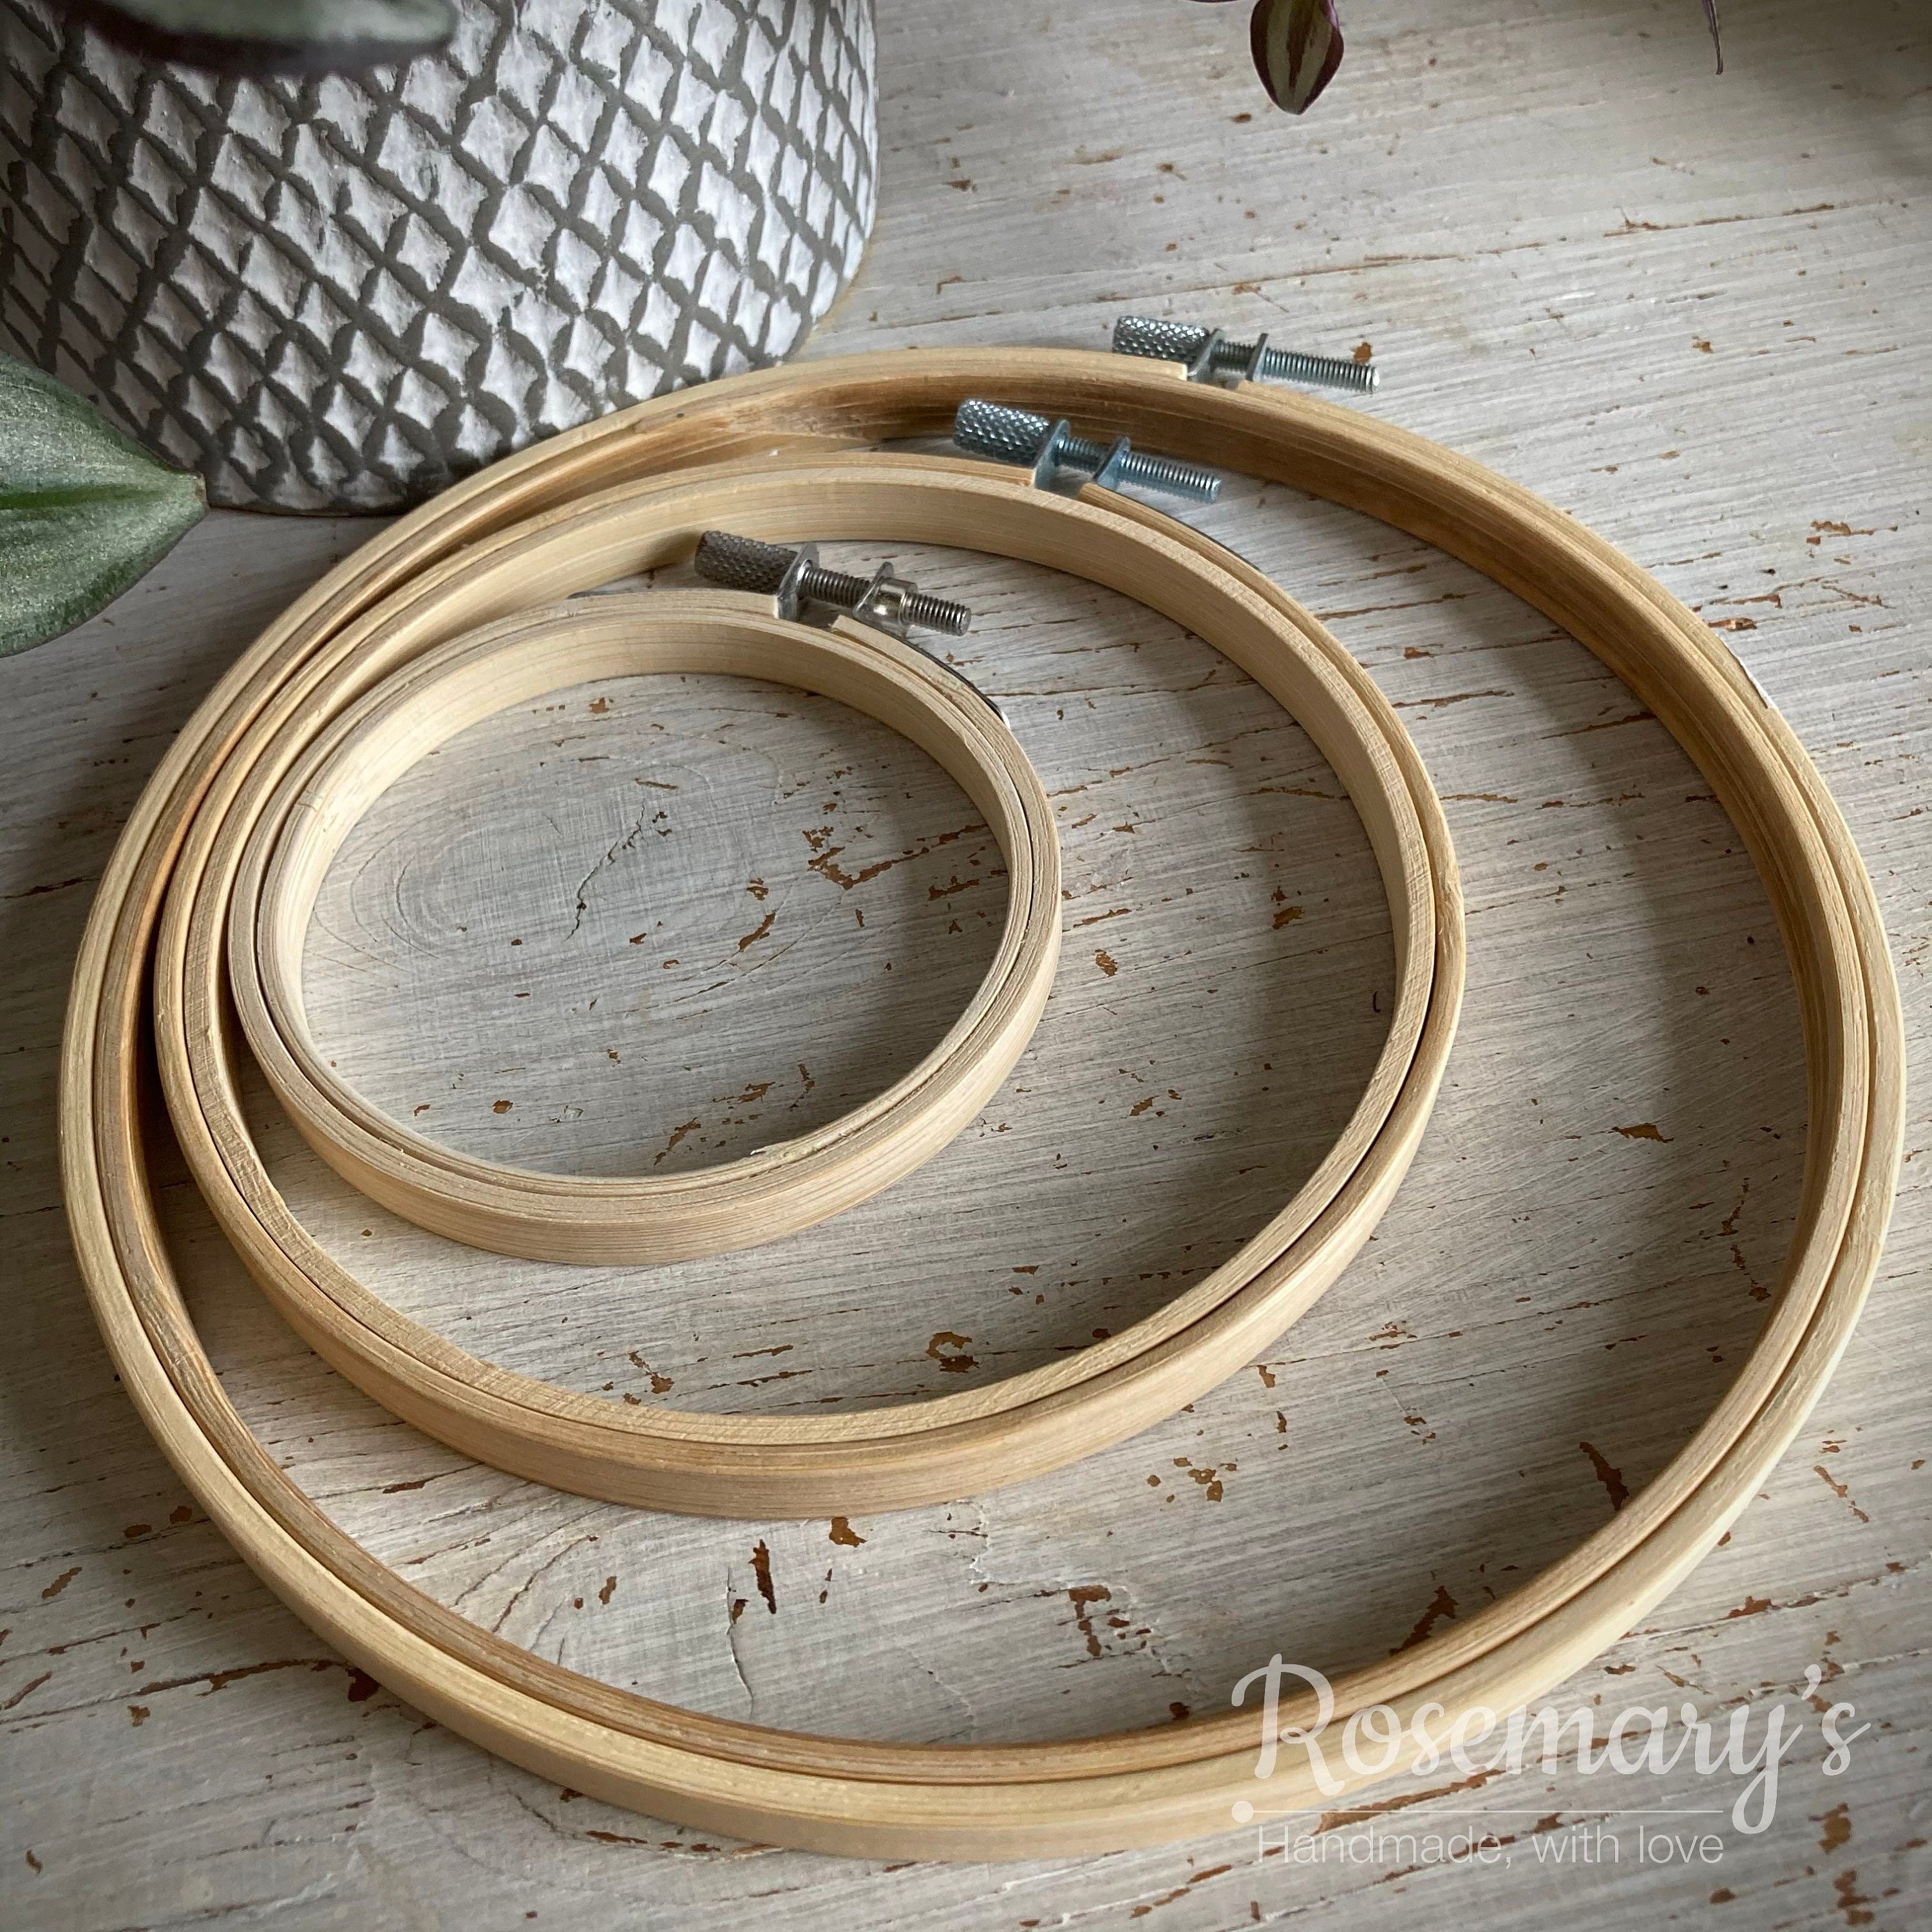 Embroidery Kits 12 Inch Hoop 